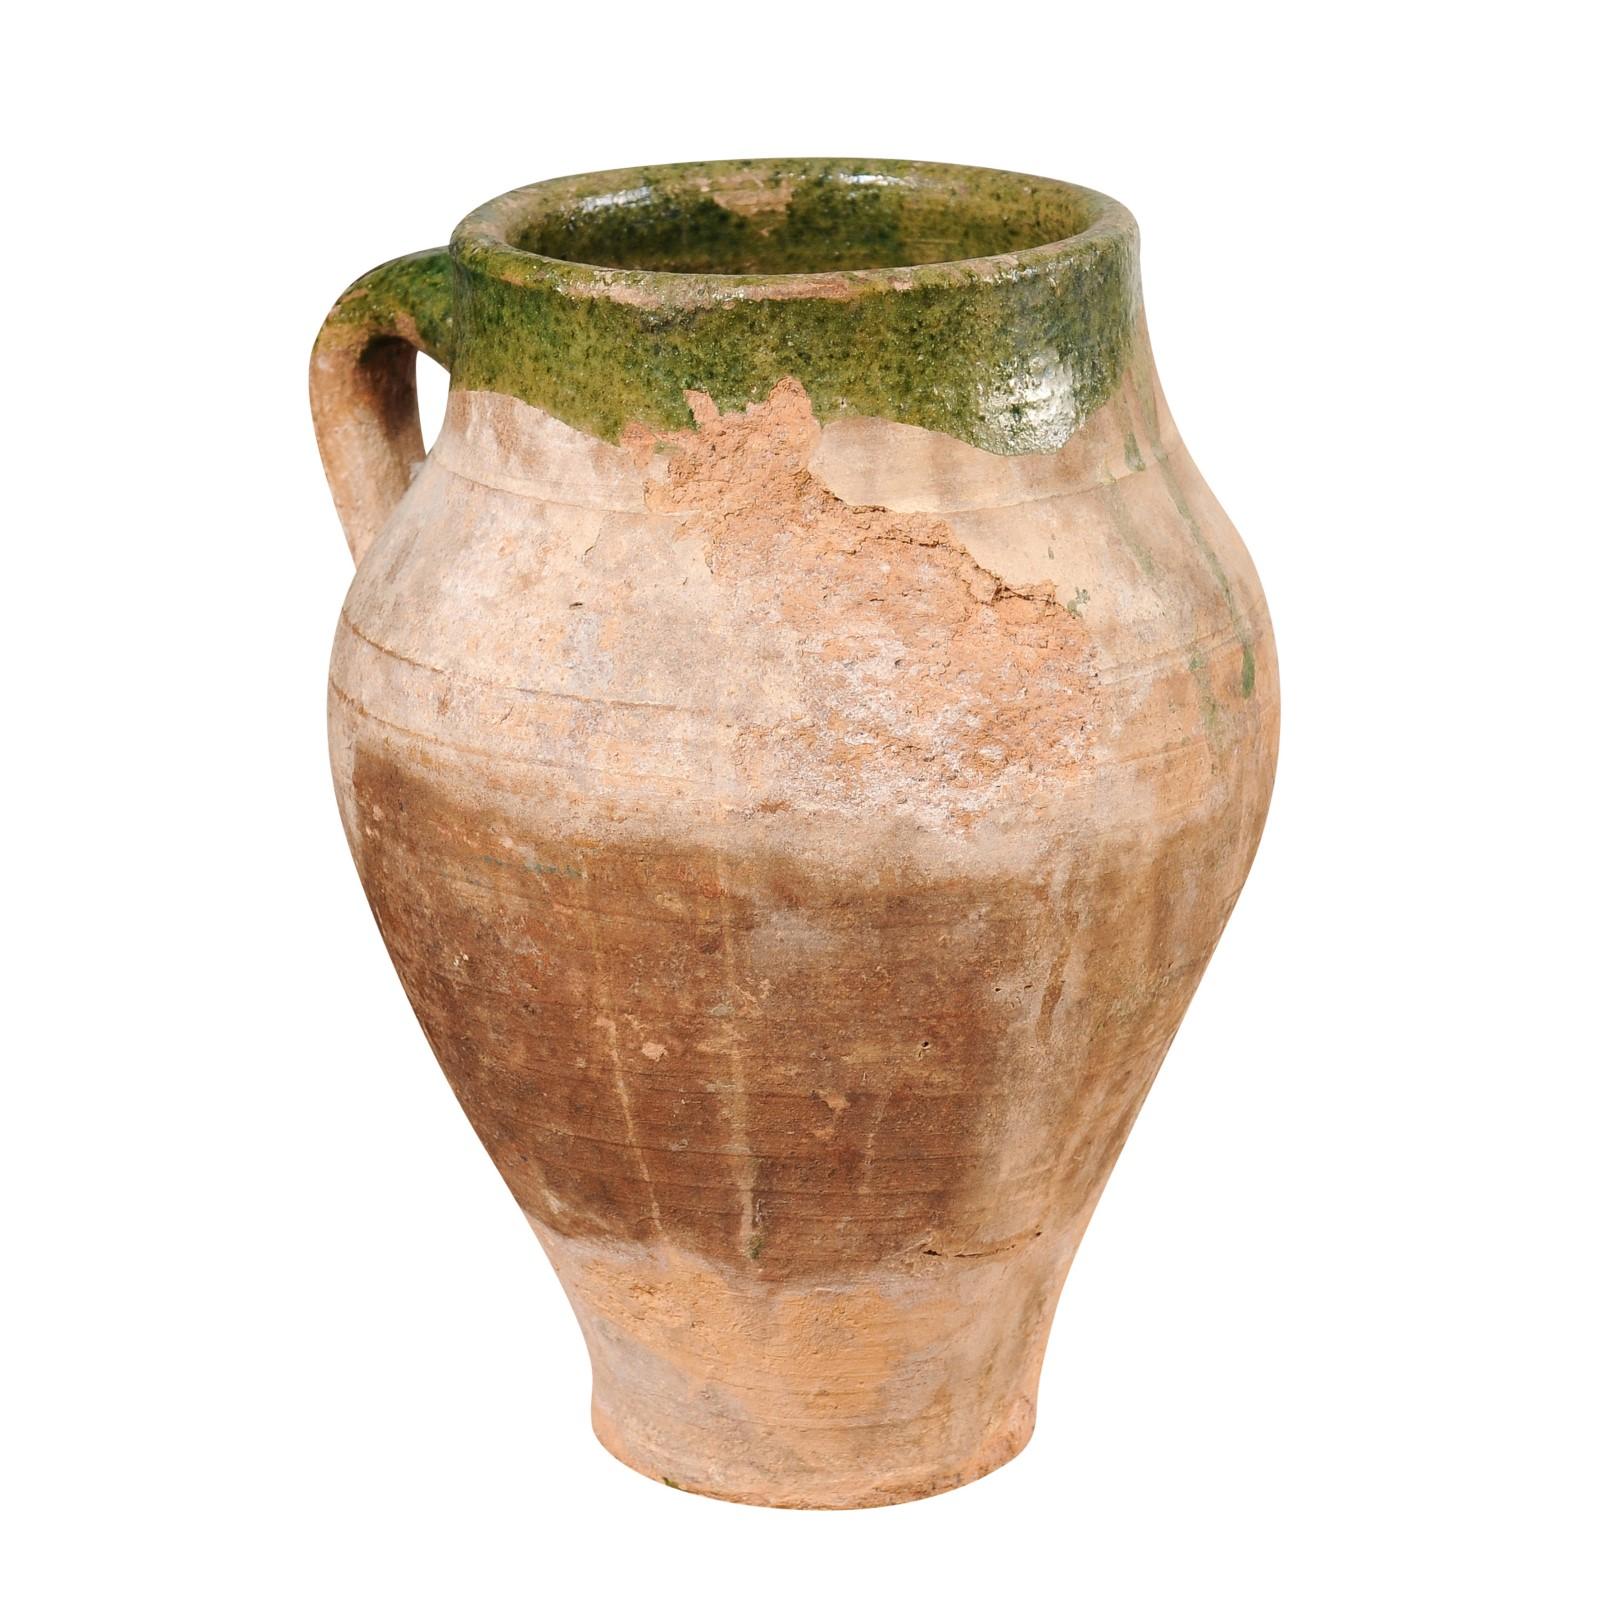 A small English terracotta olive oil jar from circa 1930 with green glaze and back handle. This small English terracotta olive oil jar, dating back to around 1930, exudes rustic charm and vintage character. Its unassuming yet captivating appearance